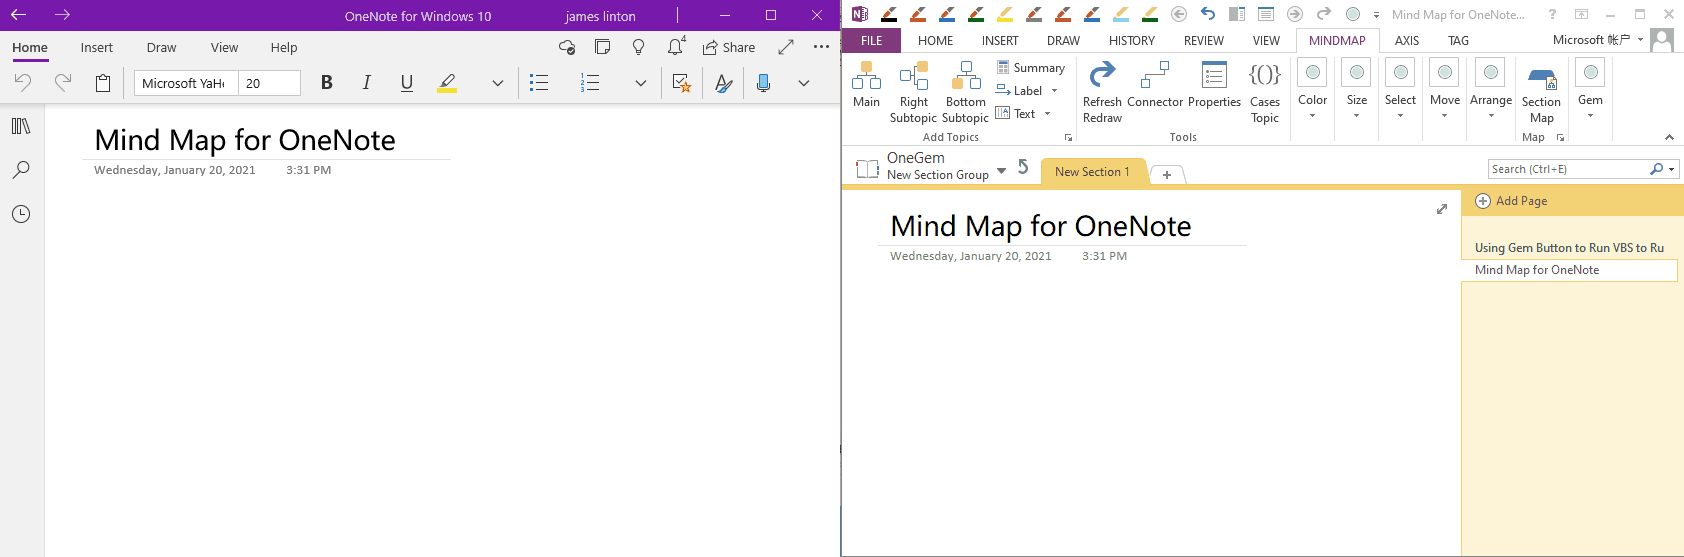 The mind map can be created in OneNote 2016 and then modified in OneNote for Win10.